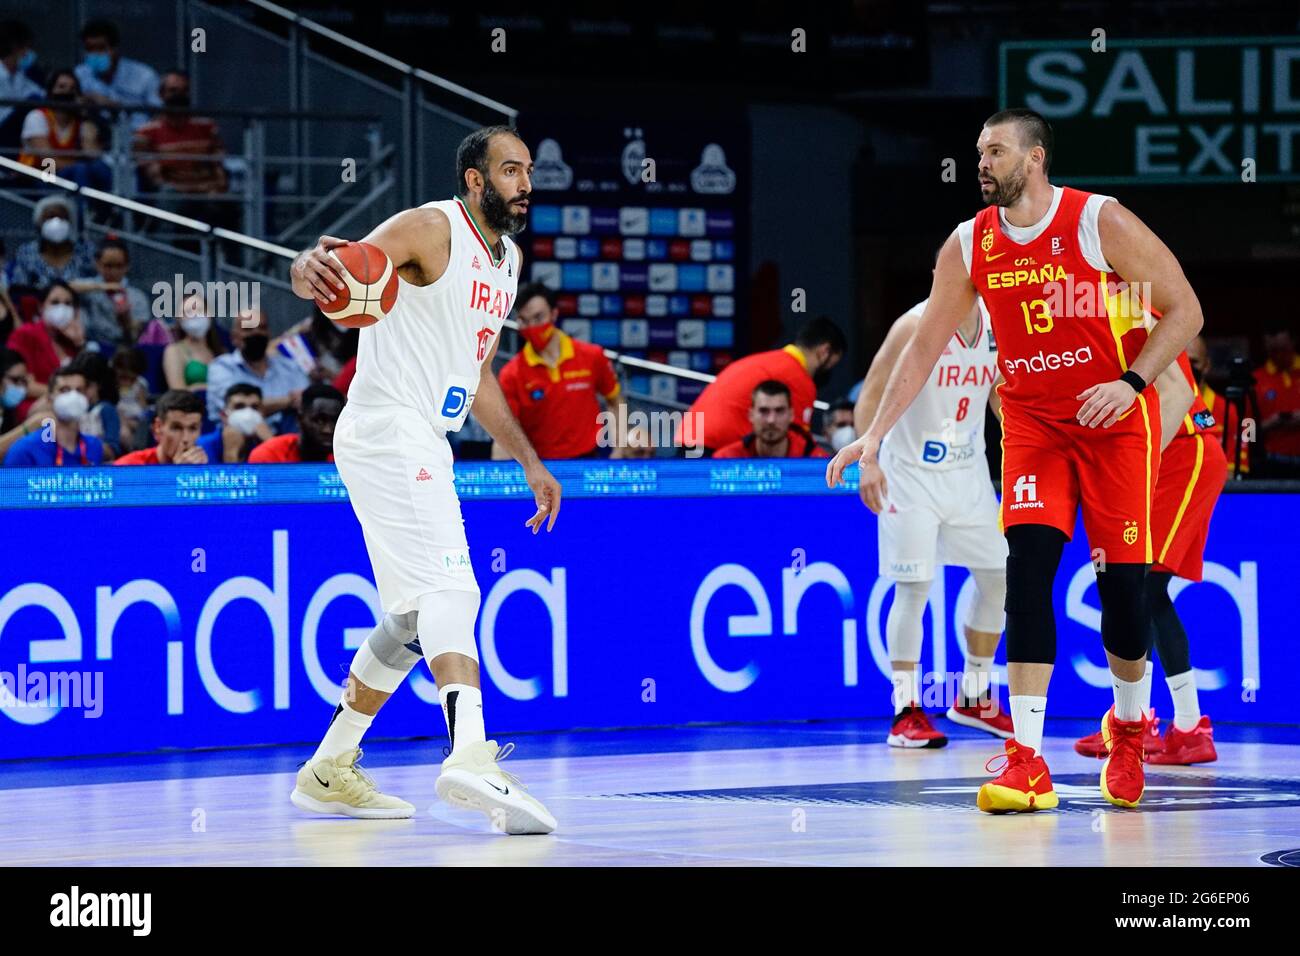 Madrid, Spain. 05th July, 2021. Hamed Haddadi (L) of Iran seen and Marc  Gasol (R) of Spain seen in action during Spain vs Iran friendly match of  basketball at Wiznink Center in